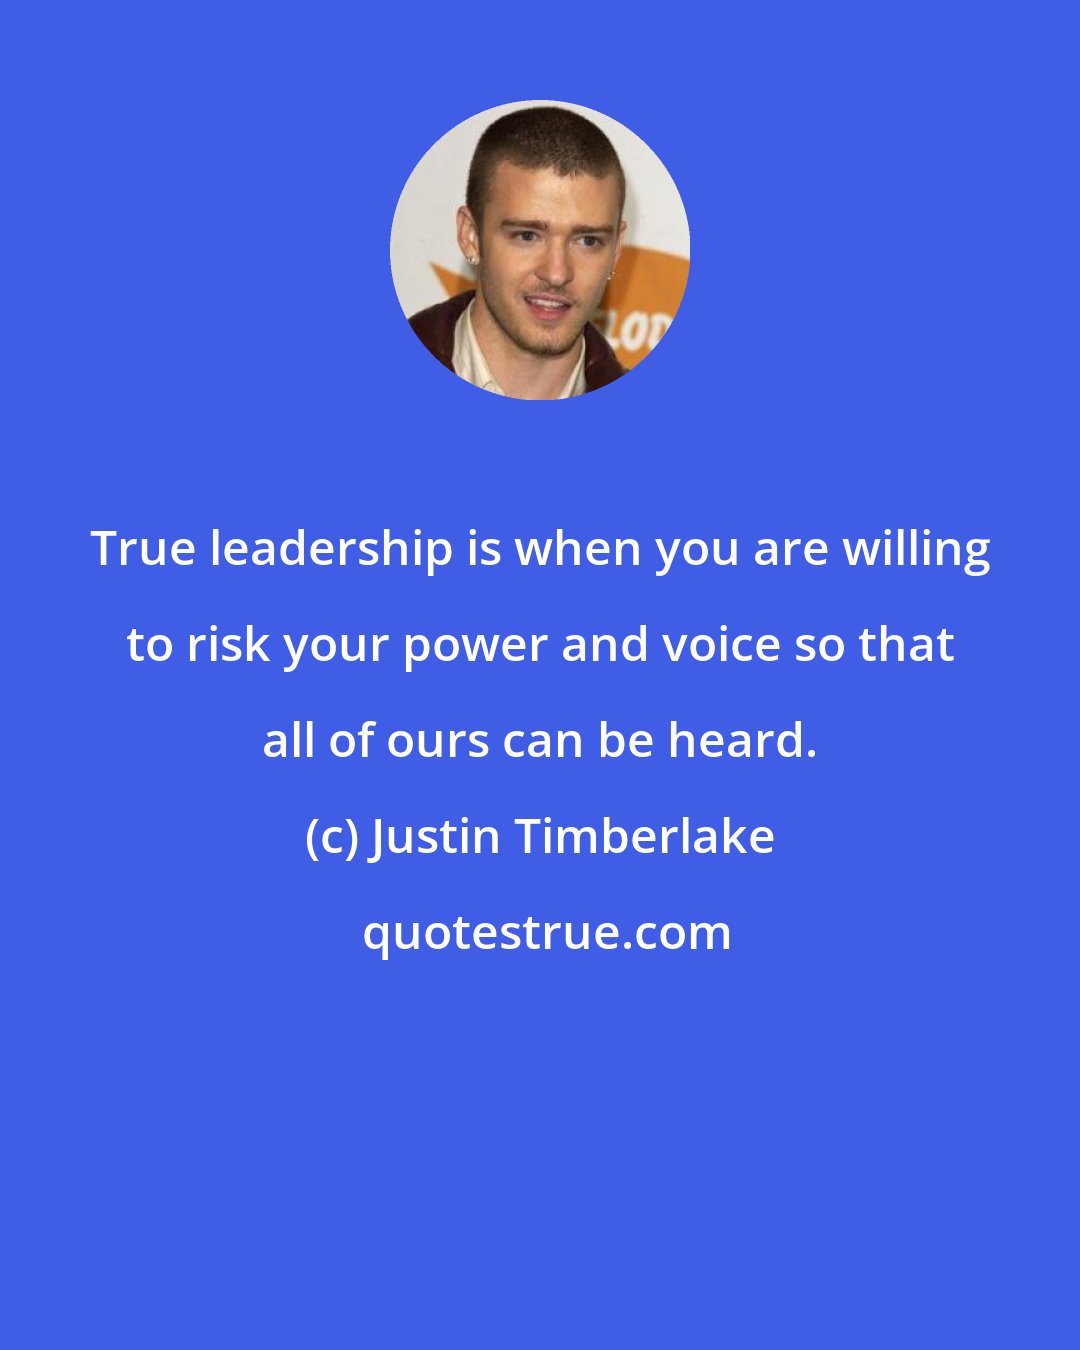 Justin Timberlake: True leadership is when you are willing to risk your power and voice so that all of ours can be heard.